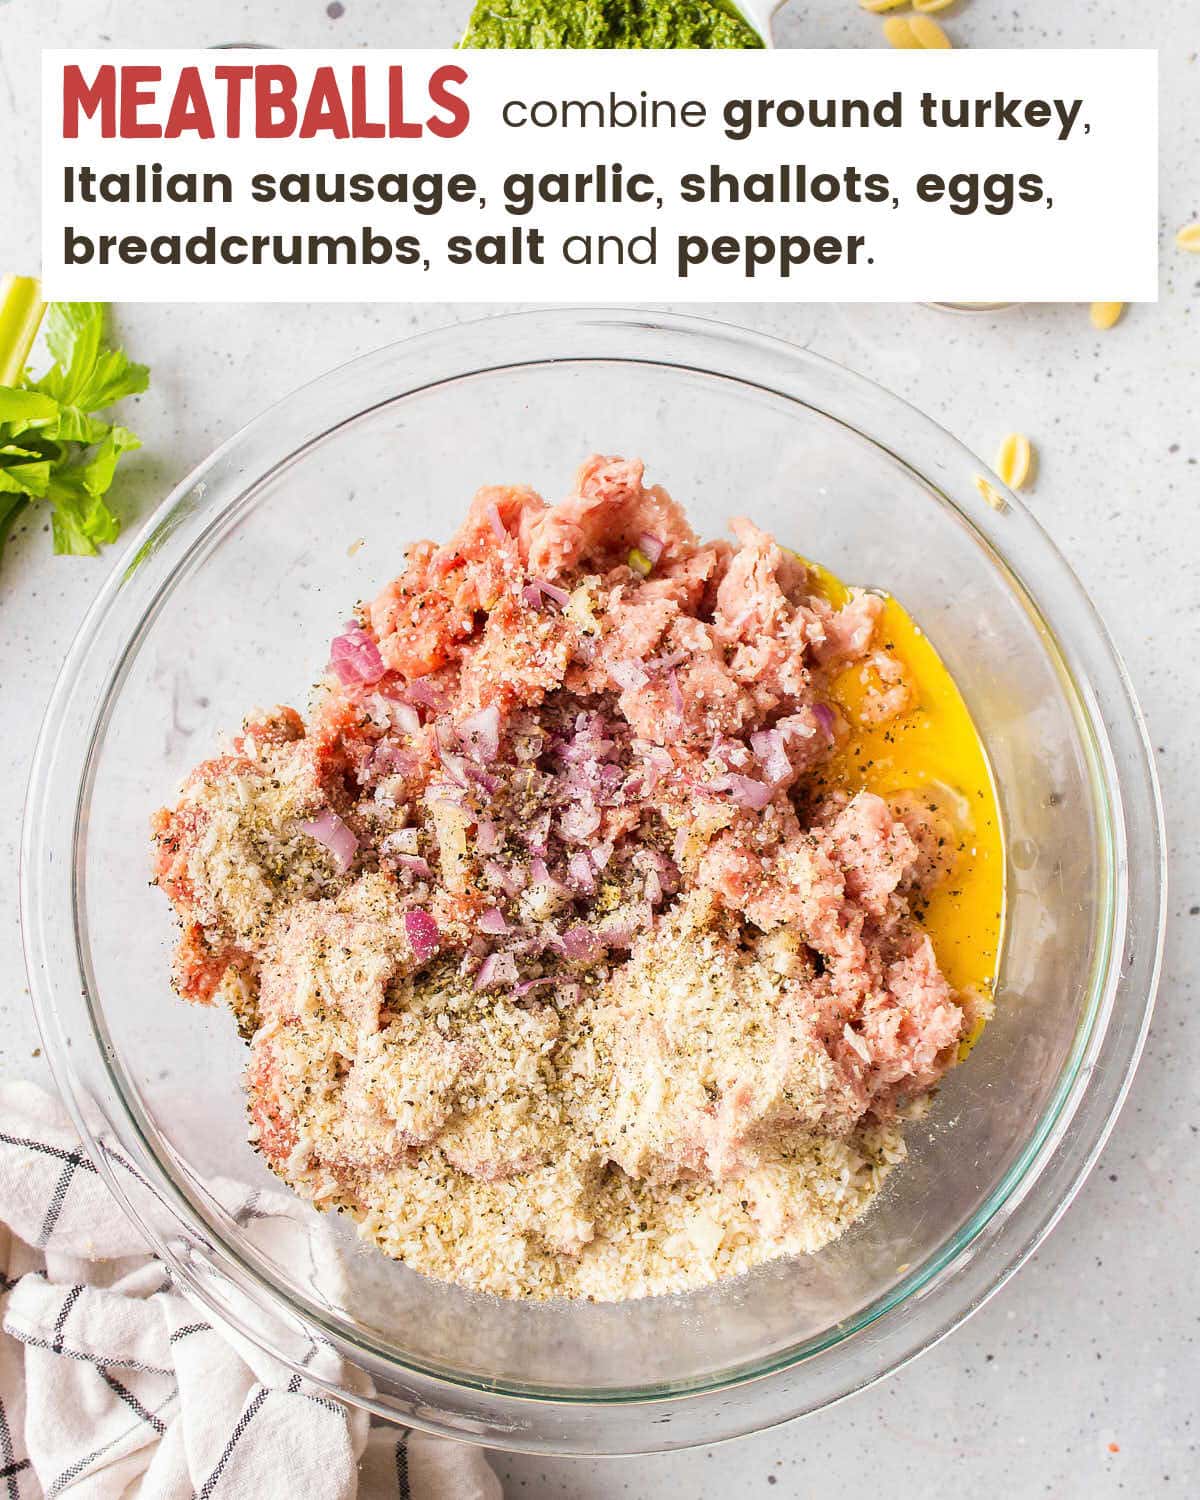 Ingredients for Italian meatballs in a bowl.